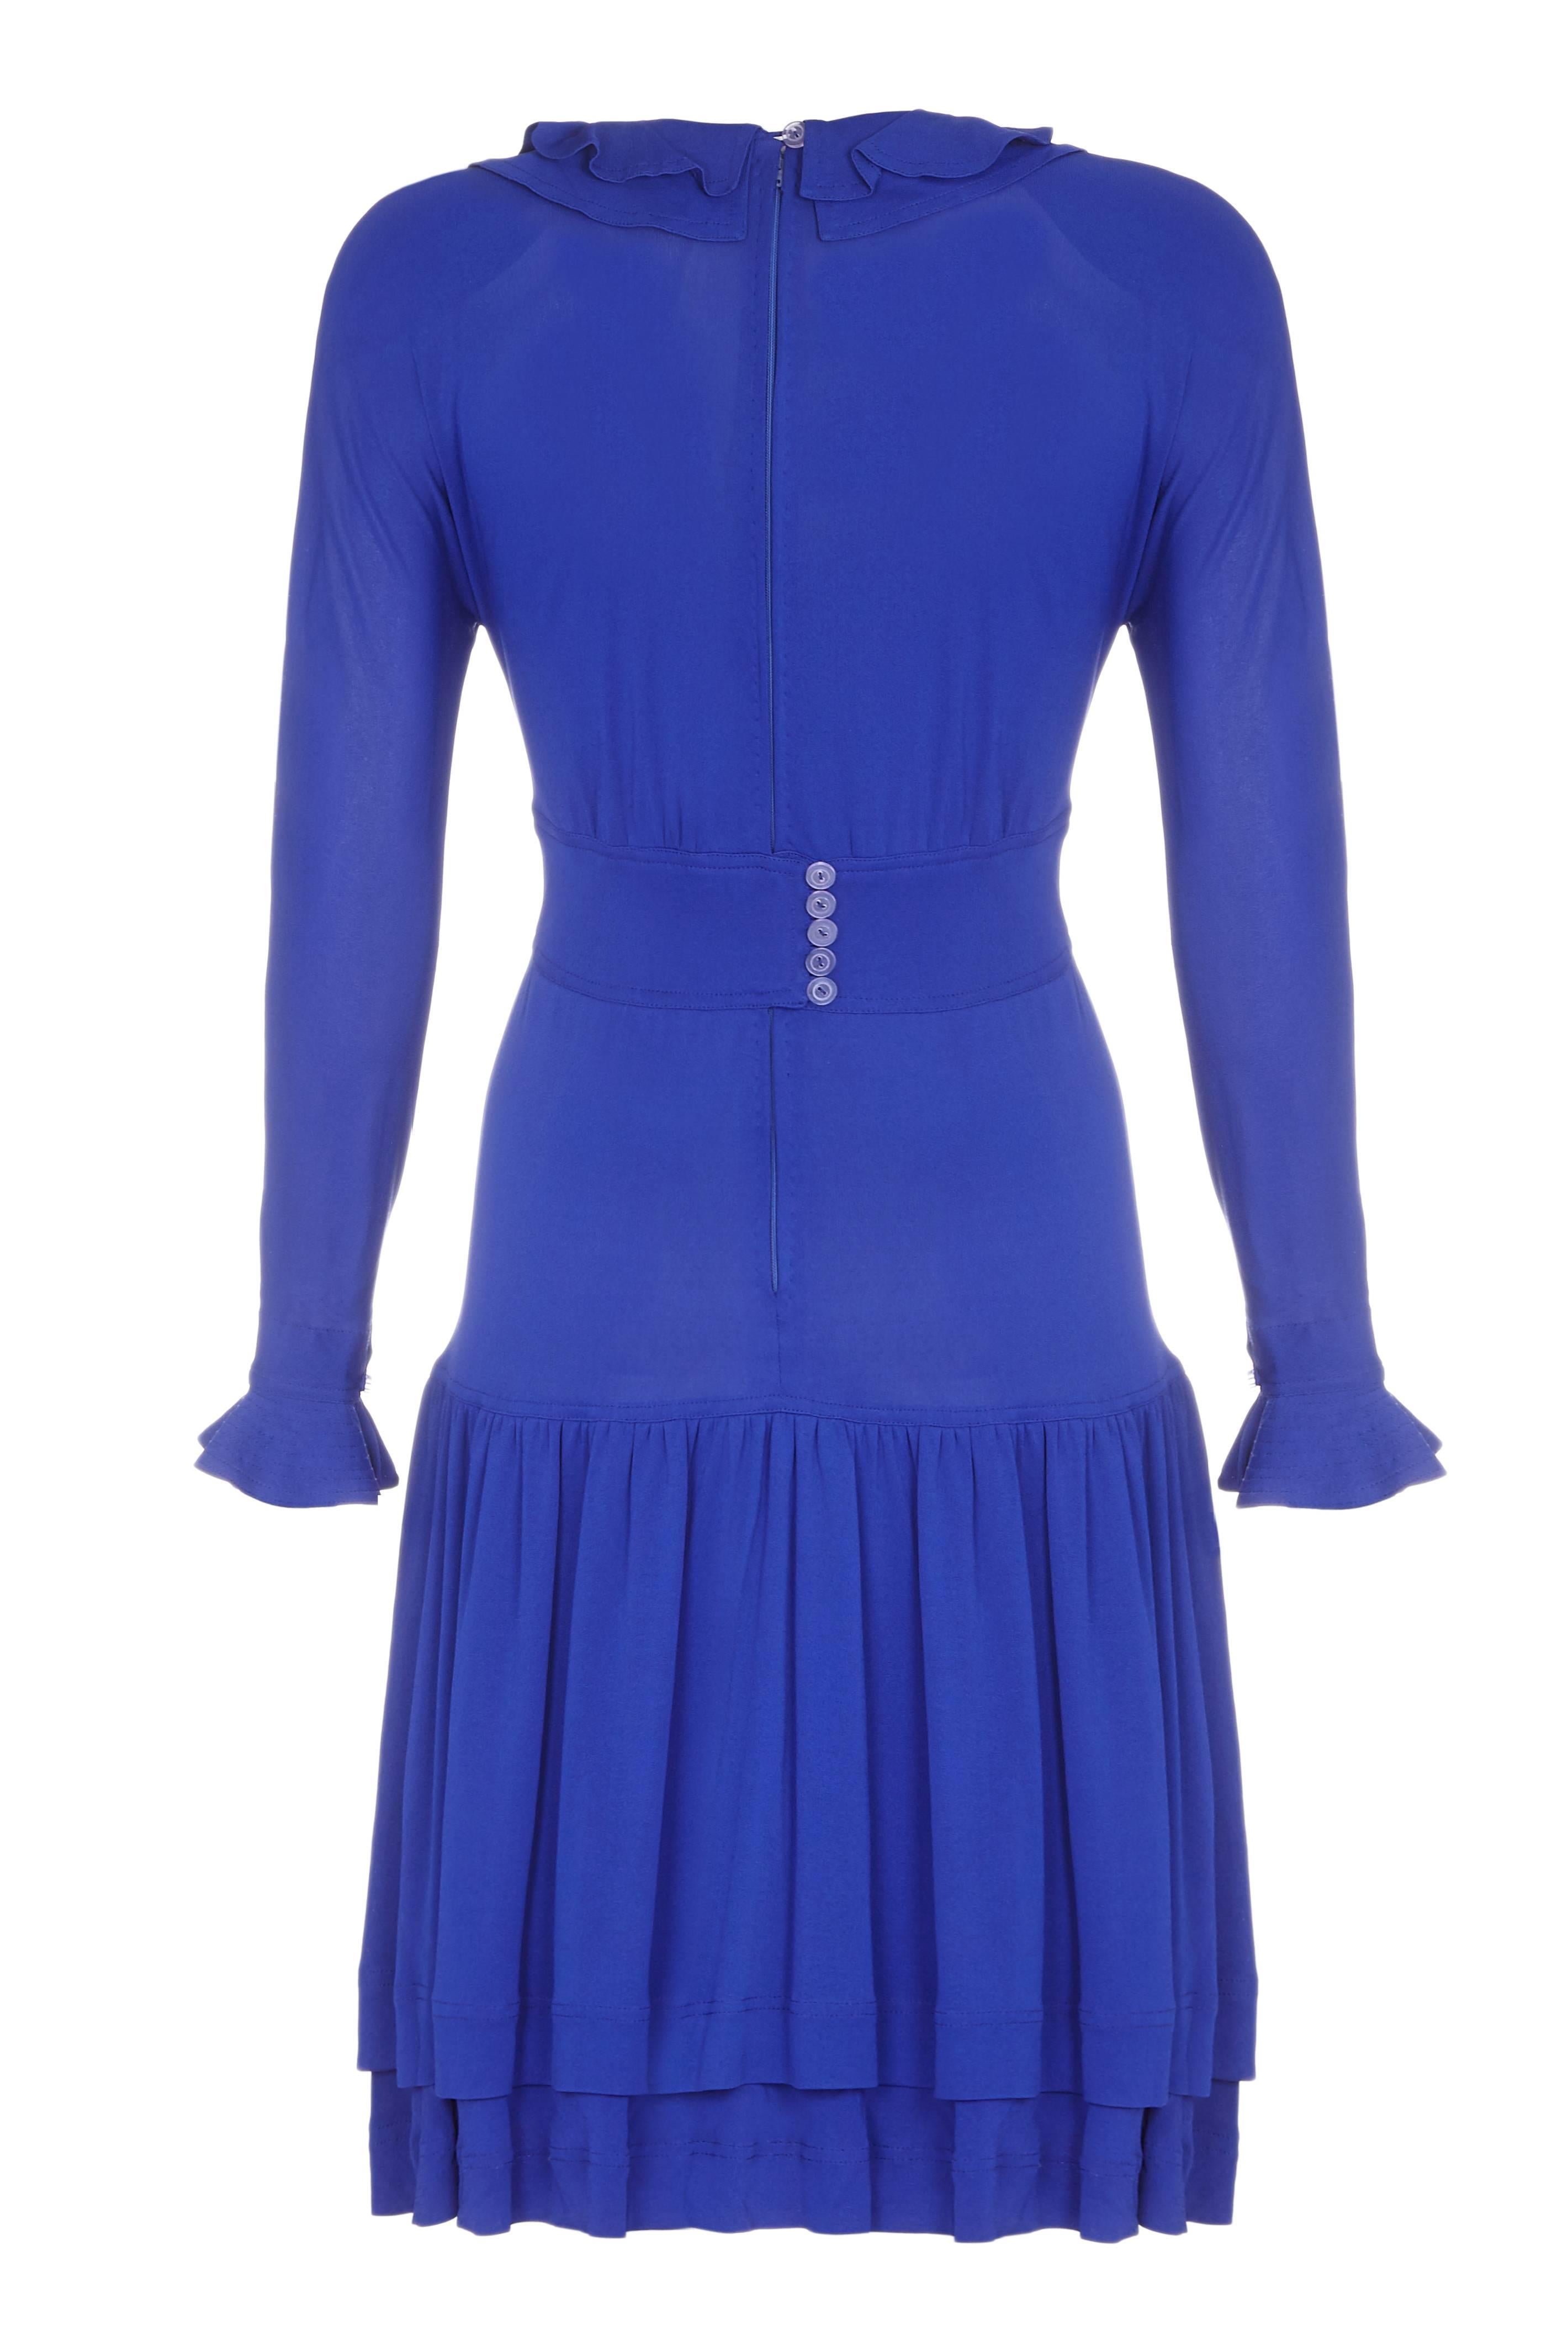 This vibrant 1980s Royal blue jersey dress is by iconic British designer Jean Muir and is in pristine vintage condition with some lovely design features. The dress is long sleeved with ruffle trim at the wrists and V neckline. The bodice is close